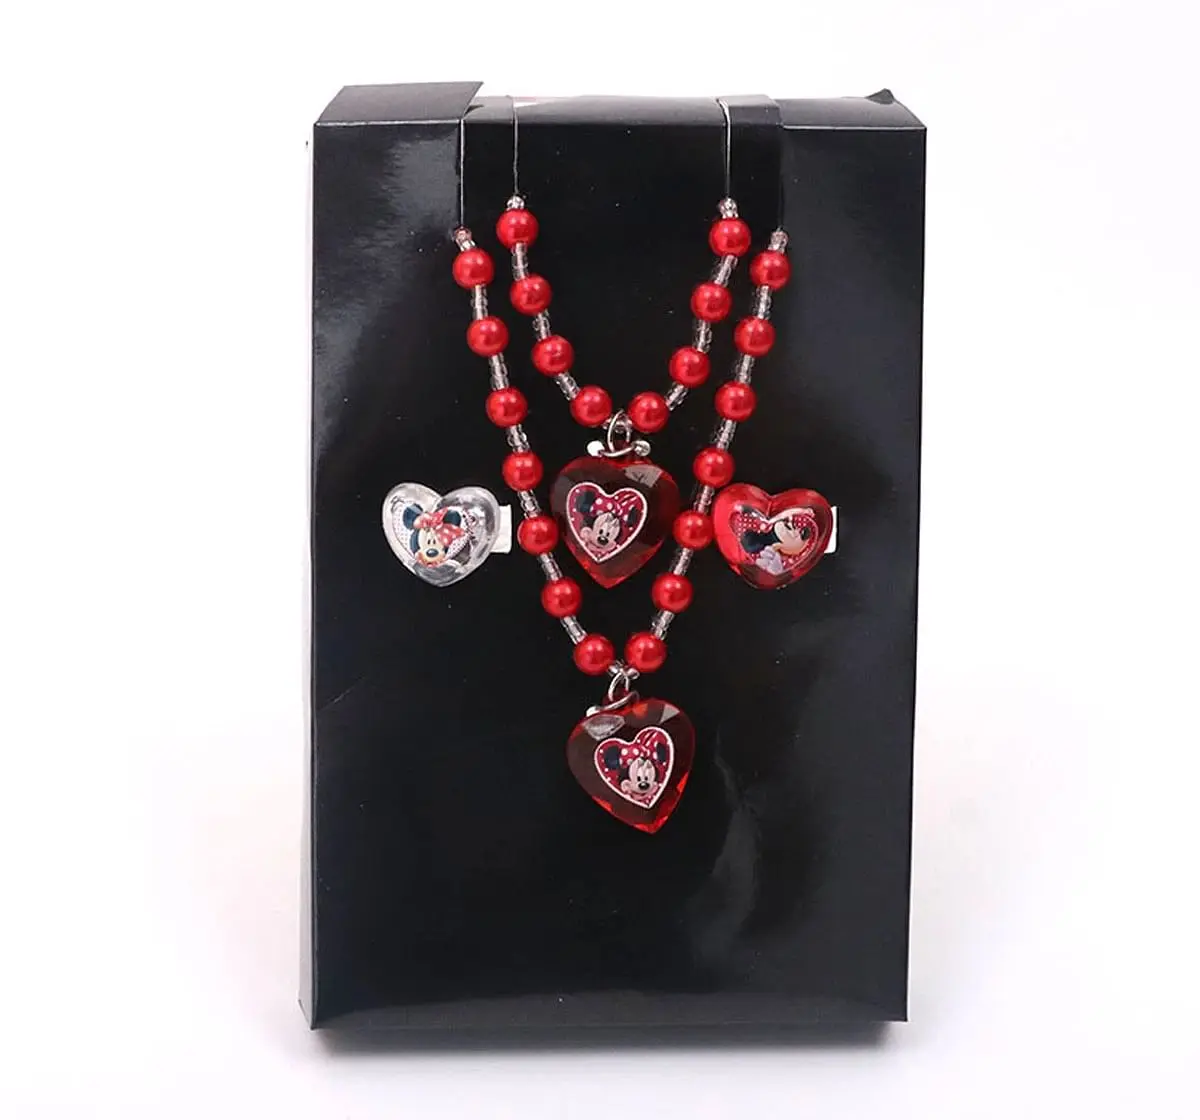 Minnie Mouse Pack Of 4 - 1 Necklace, 1 Bracelet And 2 Rings by Li'l Diva For Girls 3 Years And Above, Red